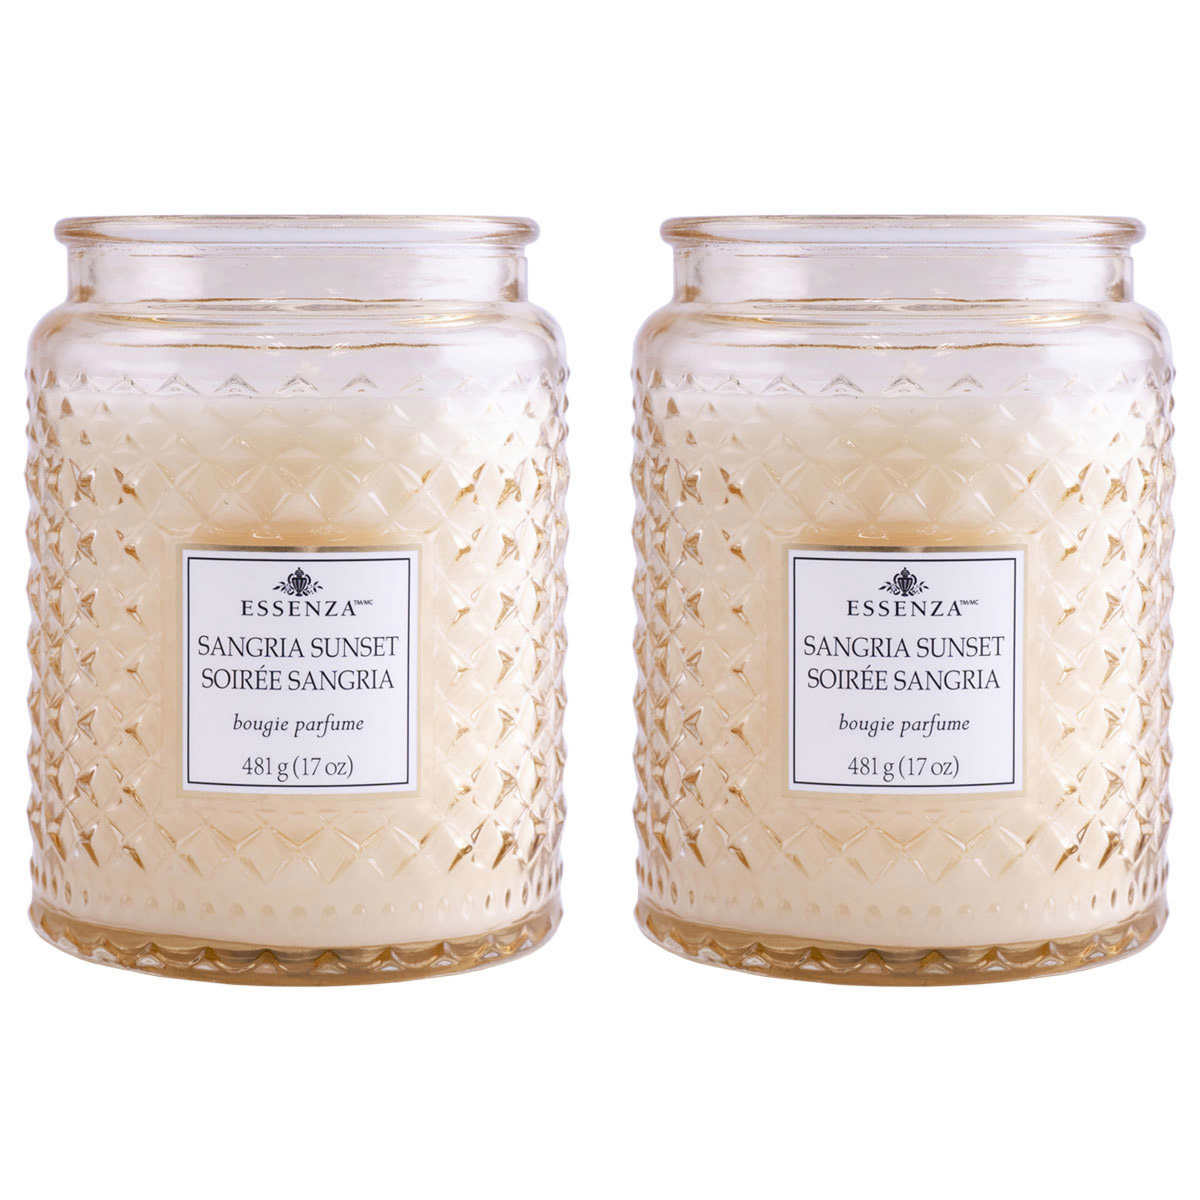 Essenza 17oz Candle, 2-pack